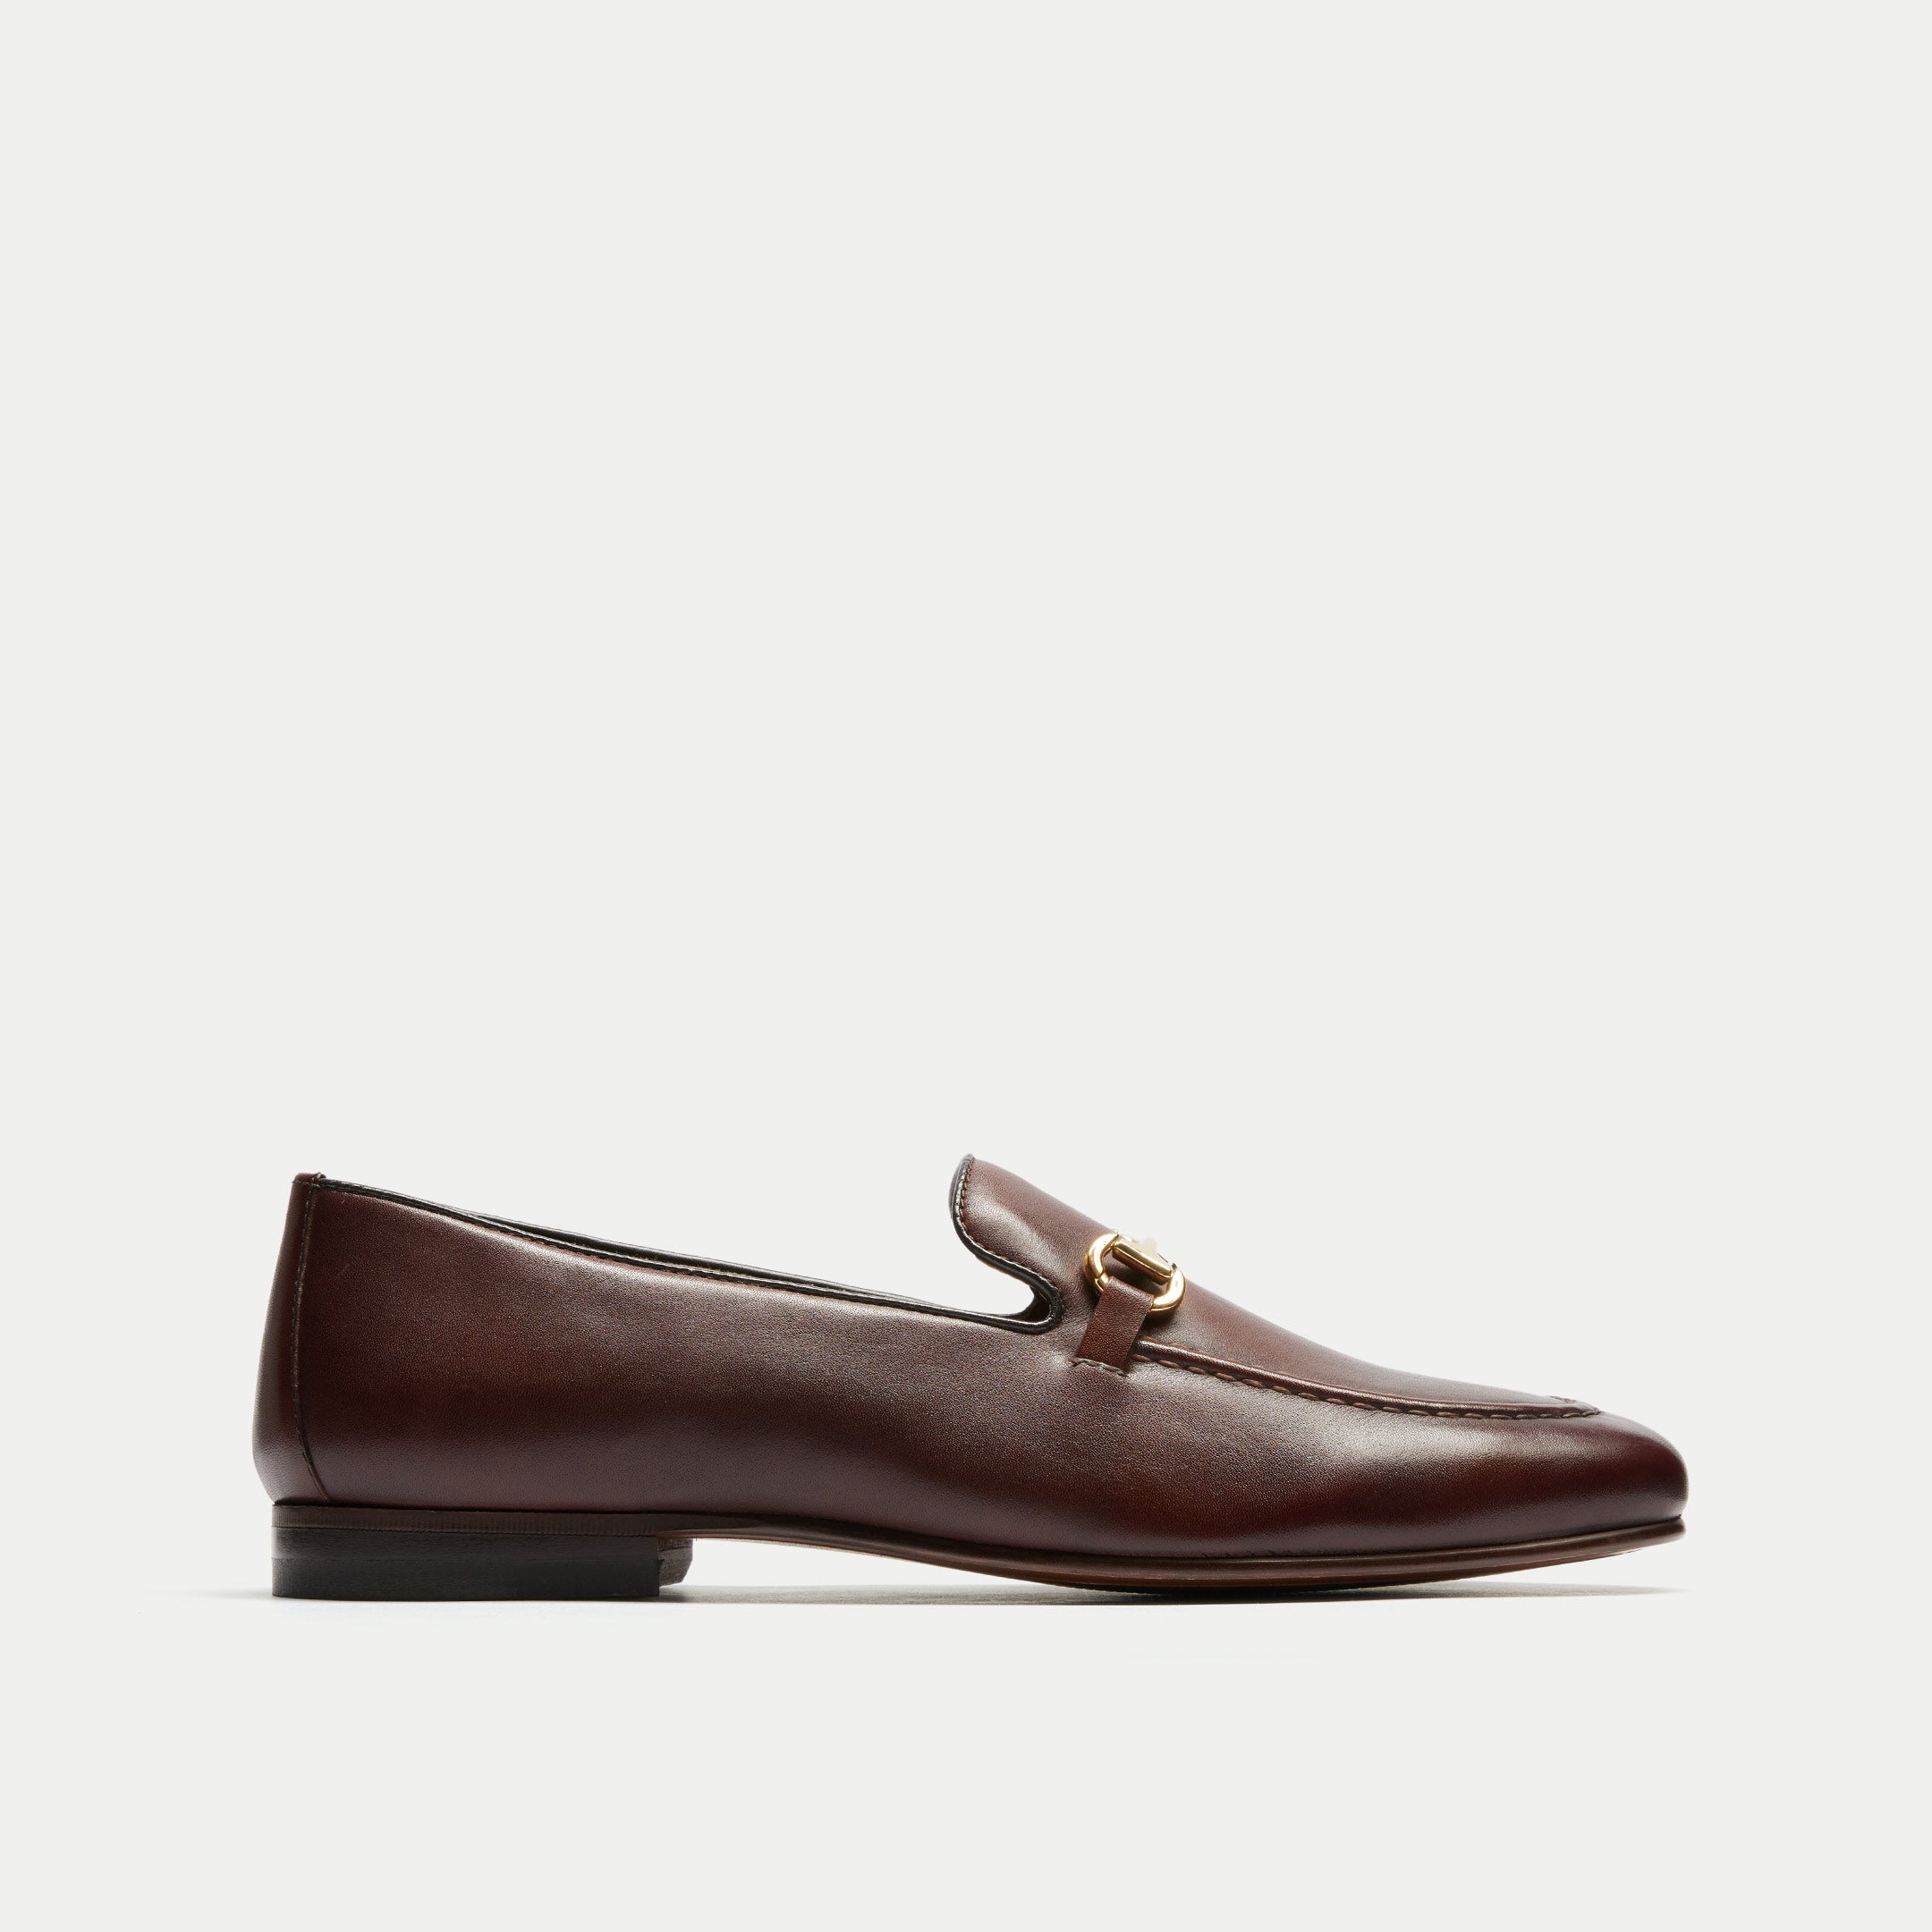 Walk London Mens Trent Trim Loafer in Brown Leather